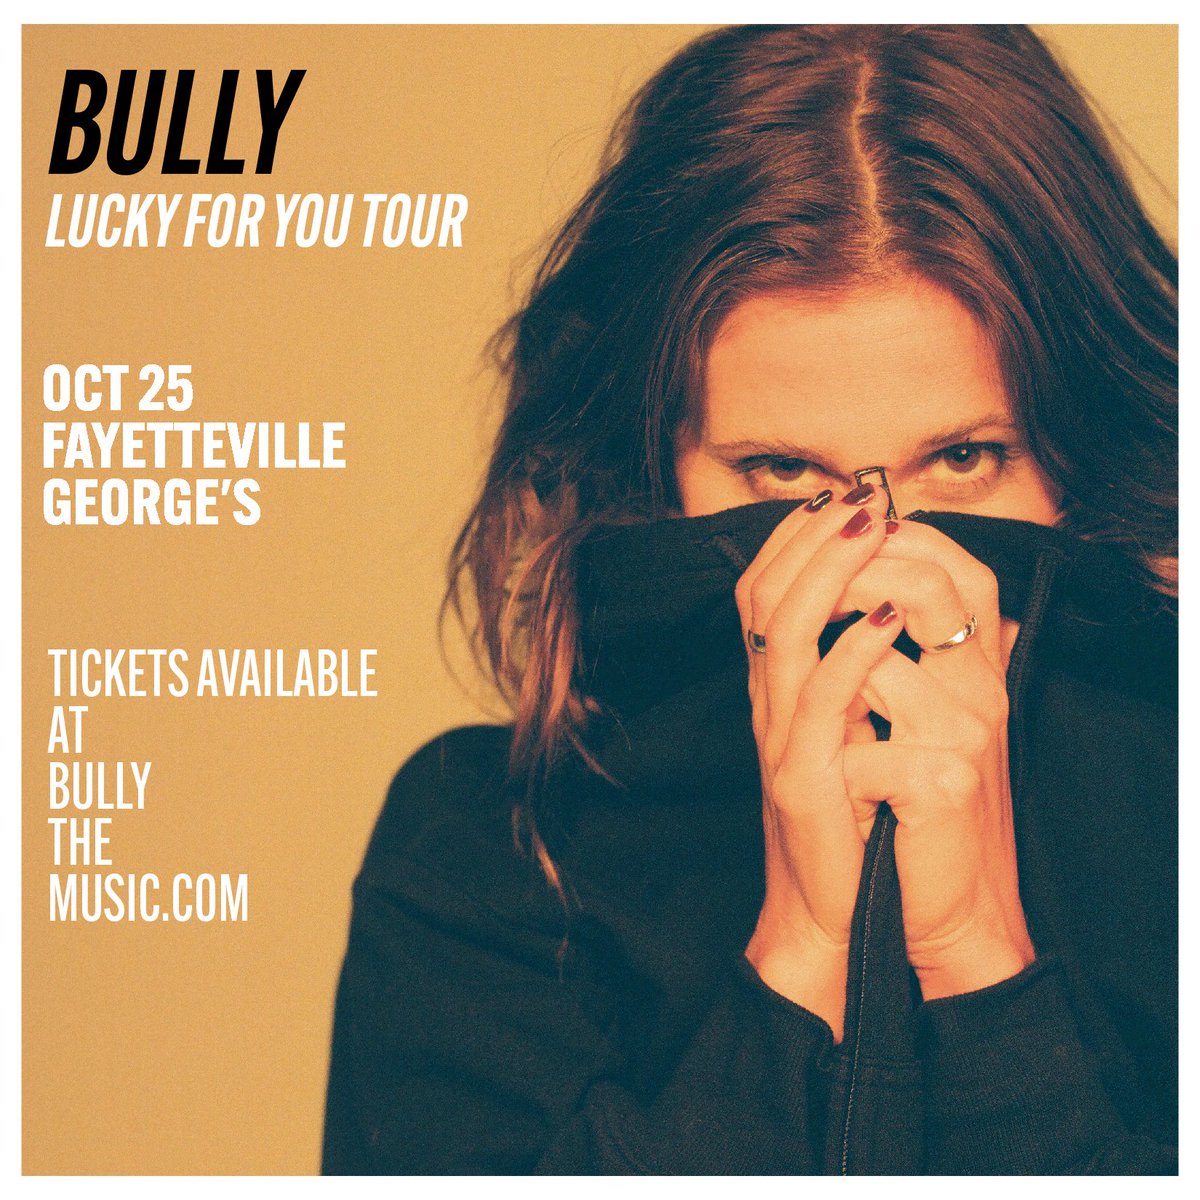 Fayetteville AR - October 25 Bully is at George's with Sub*T Tickets at georgeslive.com